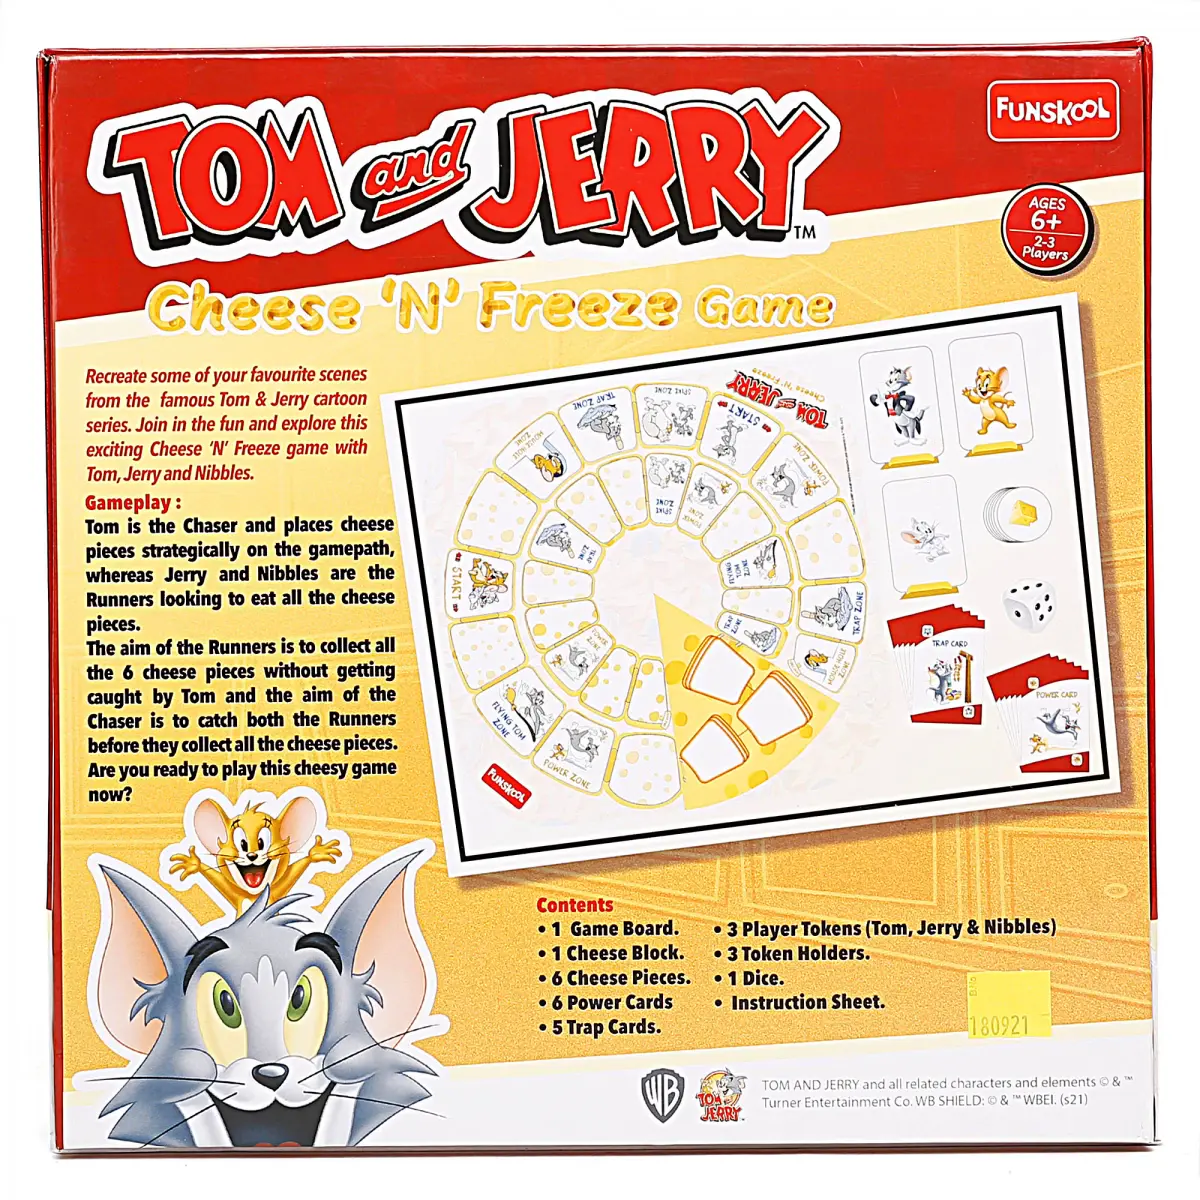 Funskool Tom and Jerry Cheese N Freeze Game, 2-3 Players, 6Y+, Multicolour